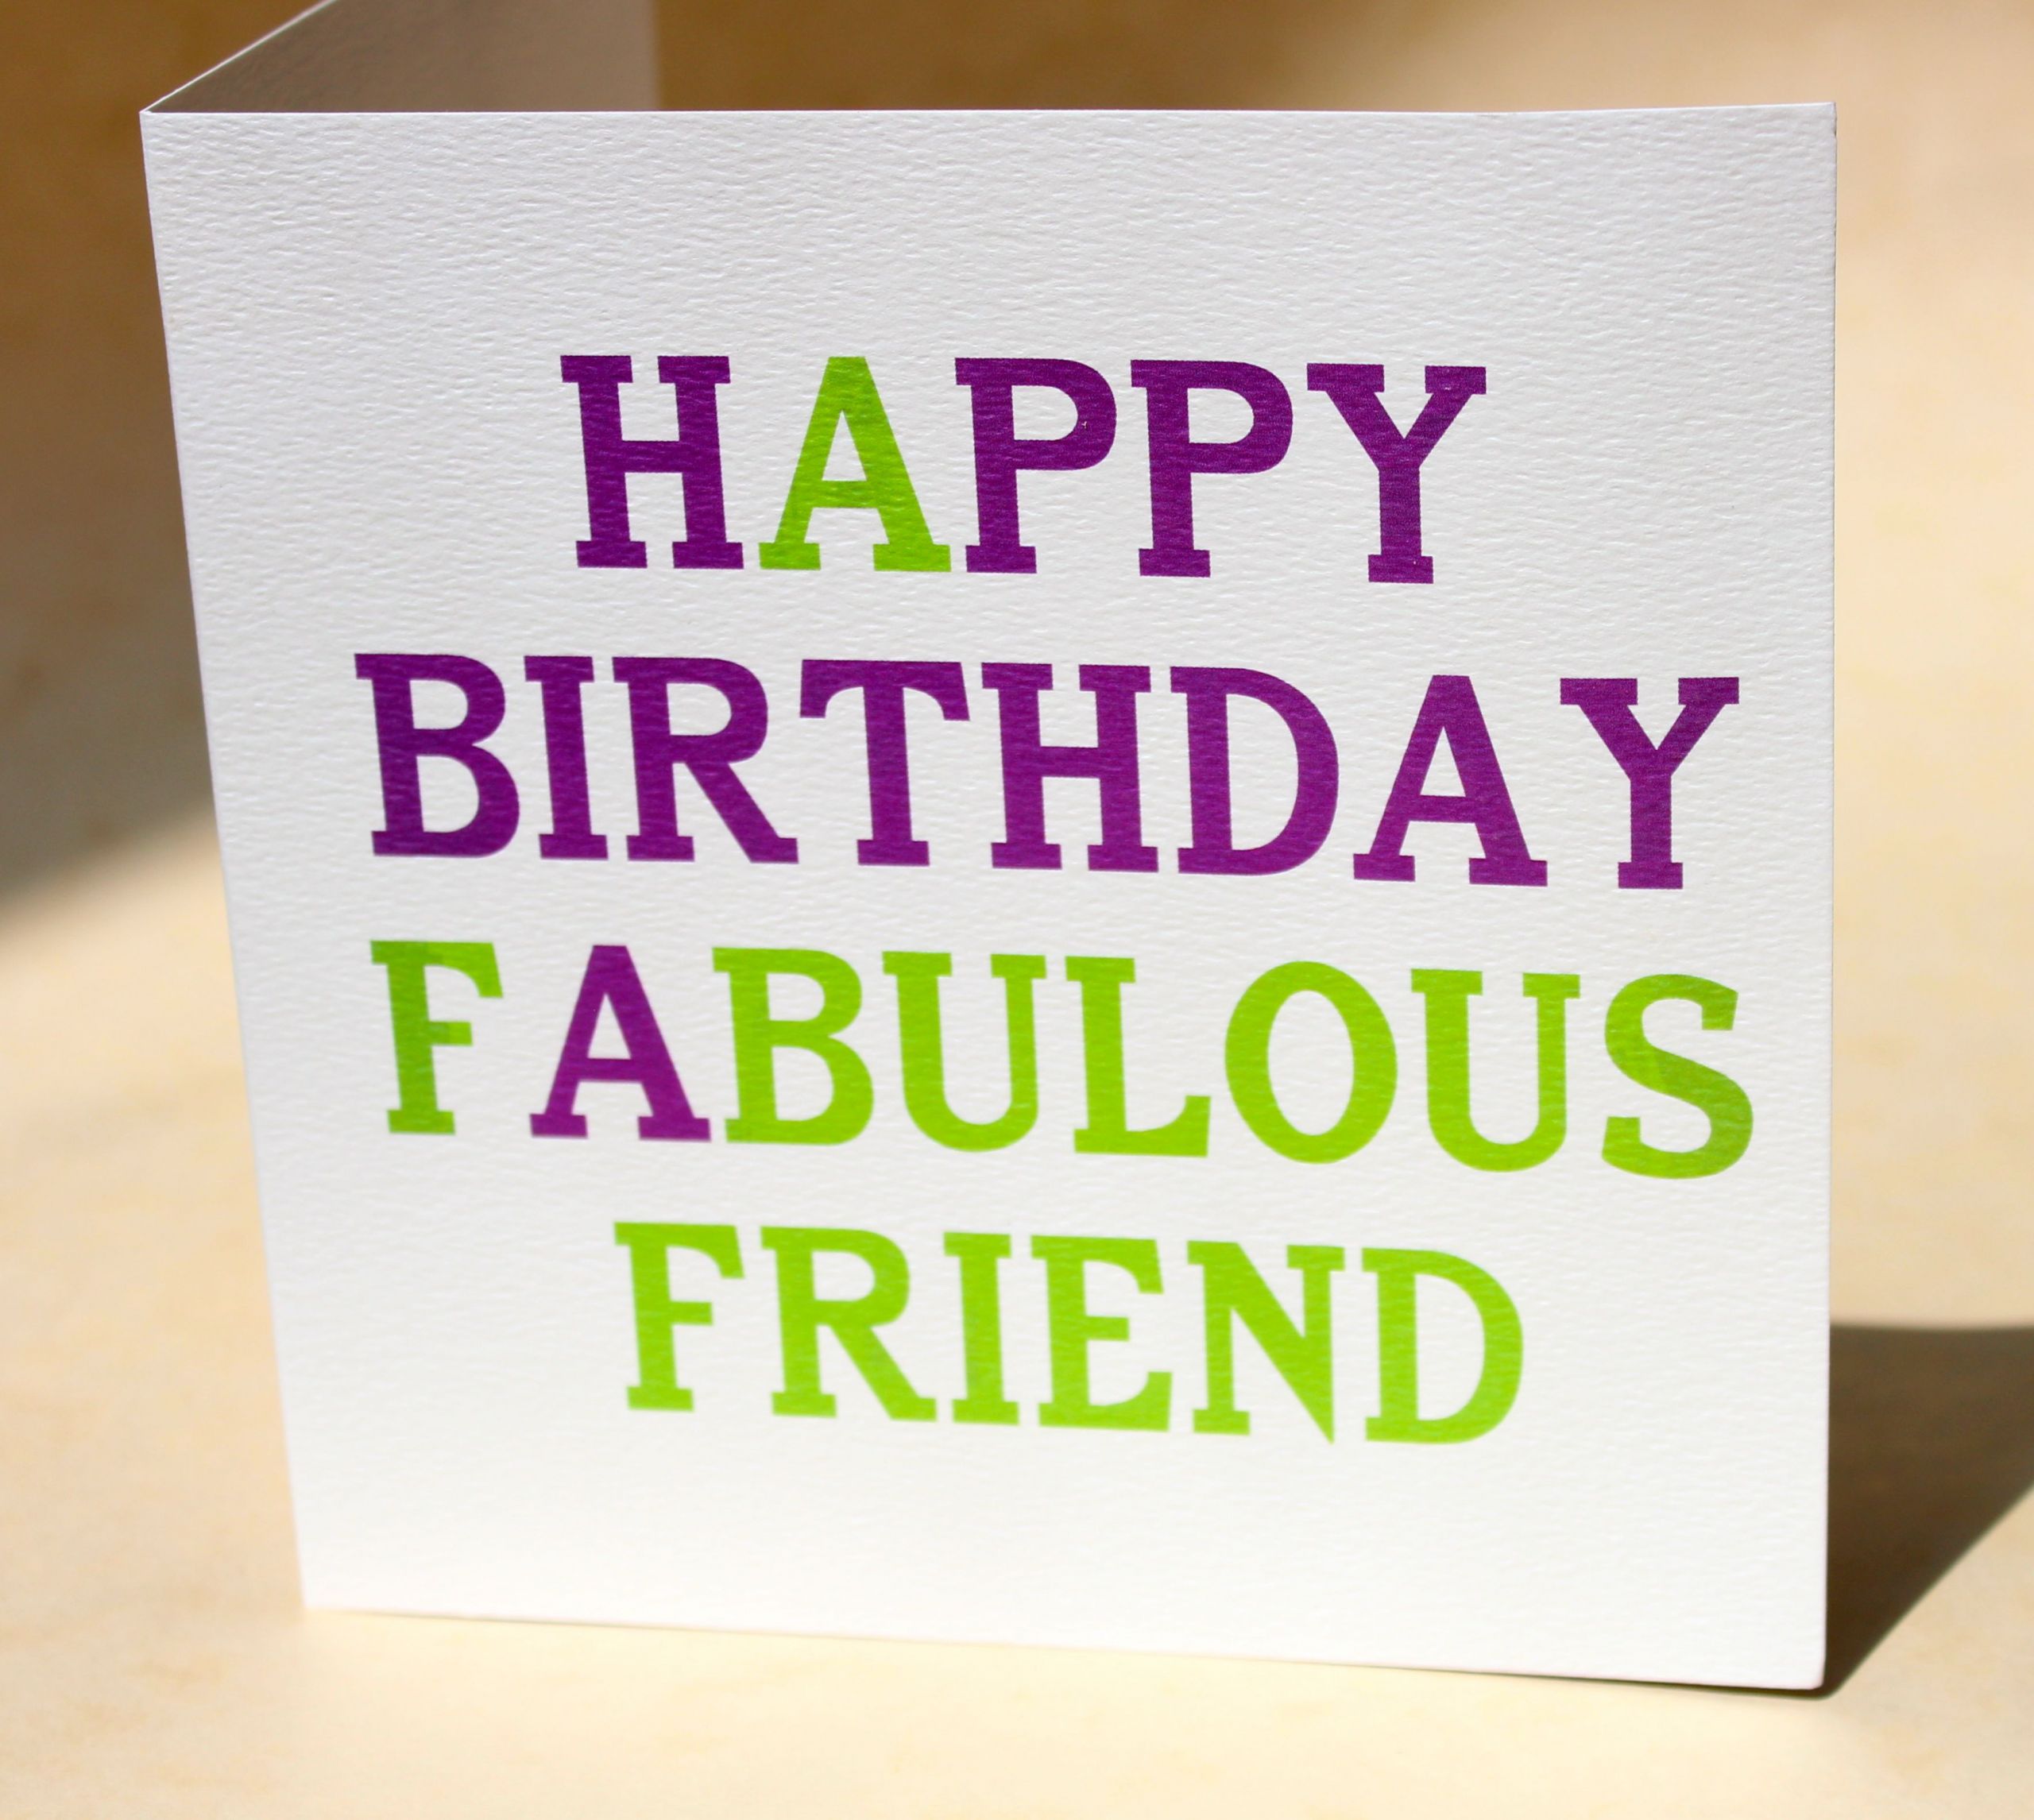 Happy Birthday To Friend Quote
 Happy birthday friends quotes pictures